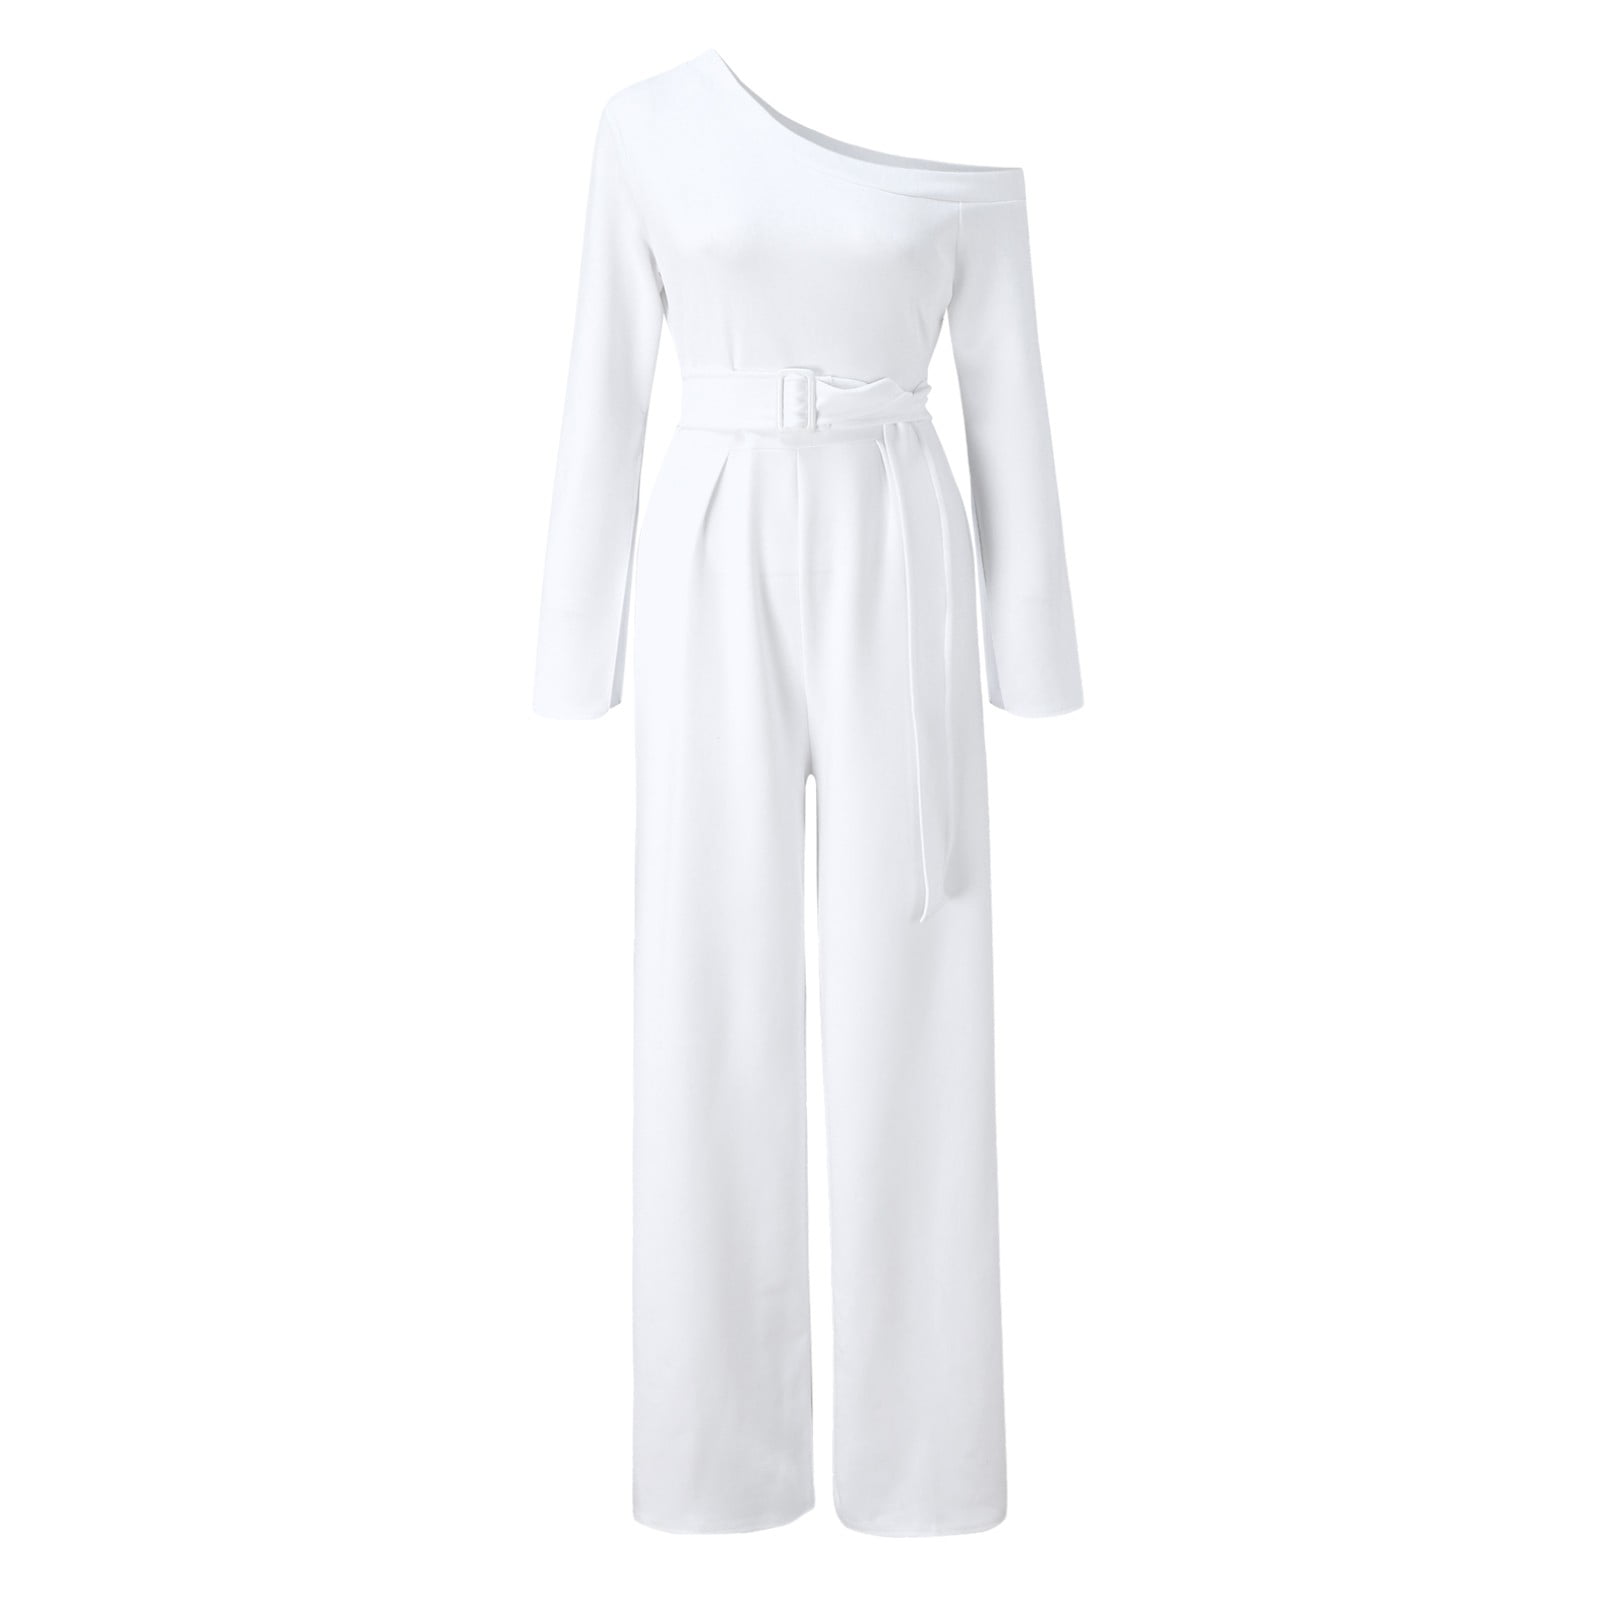 Larisalt Matching Sets For Women Winter,Women Stripe Patchwork Two Piece  Sweatsuit Round Neck Pullover and Skinny Long Pants Sets White,M -  Walmart.com